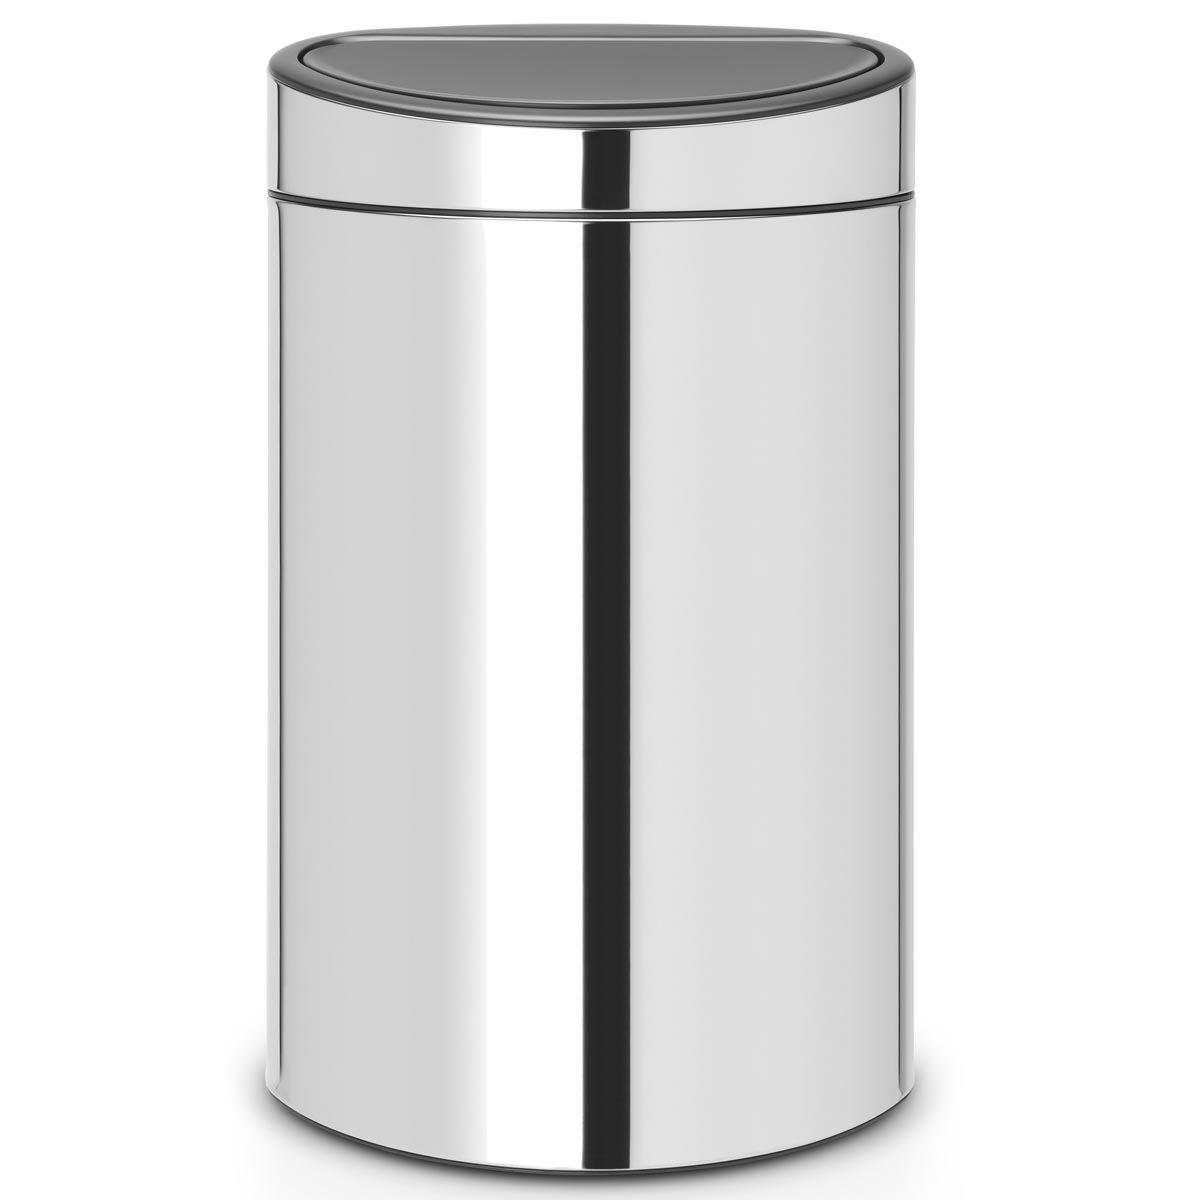 Is the Brabantia Touch Bin press and pop up?